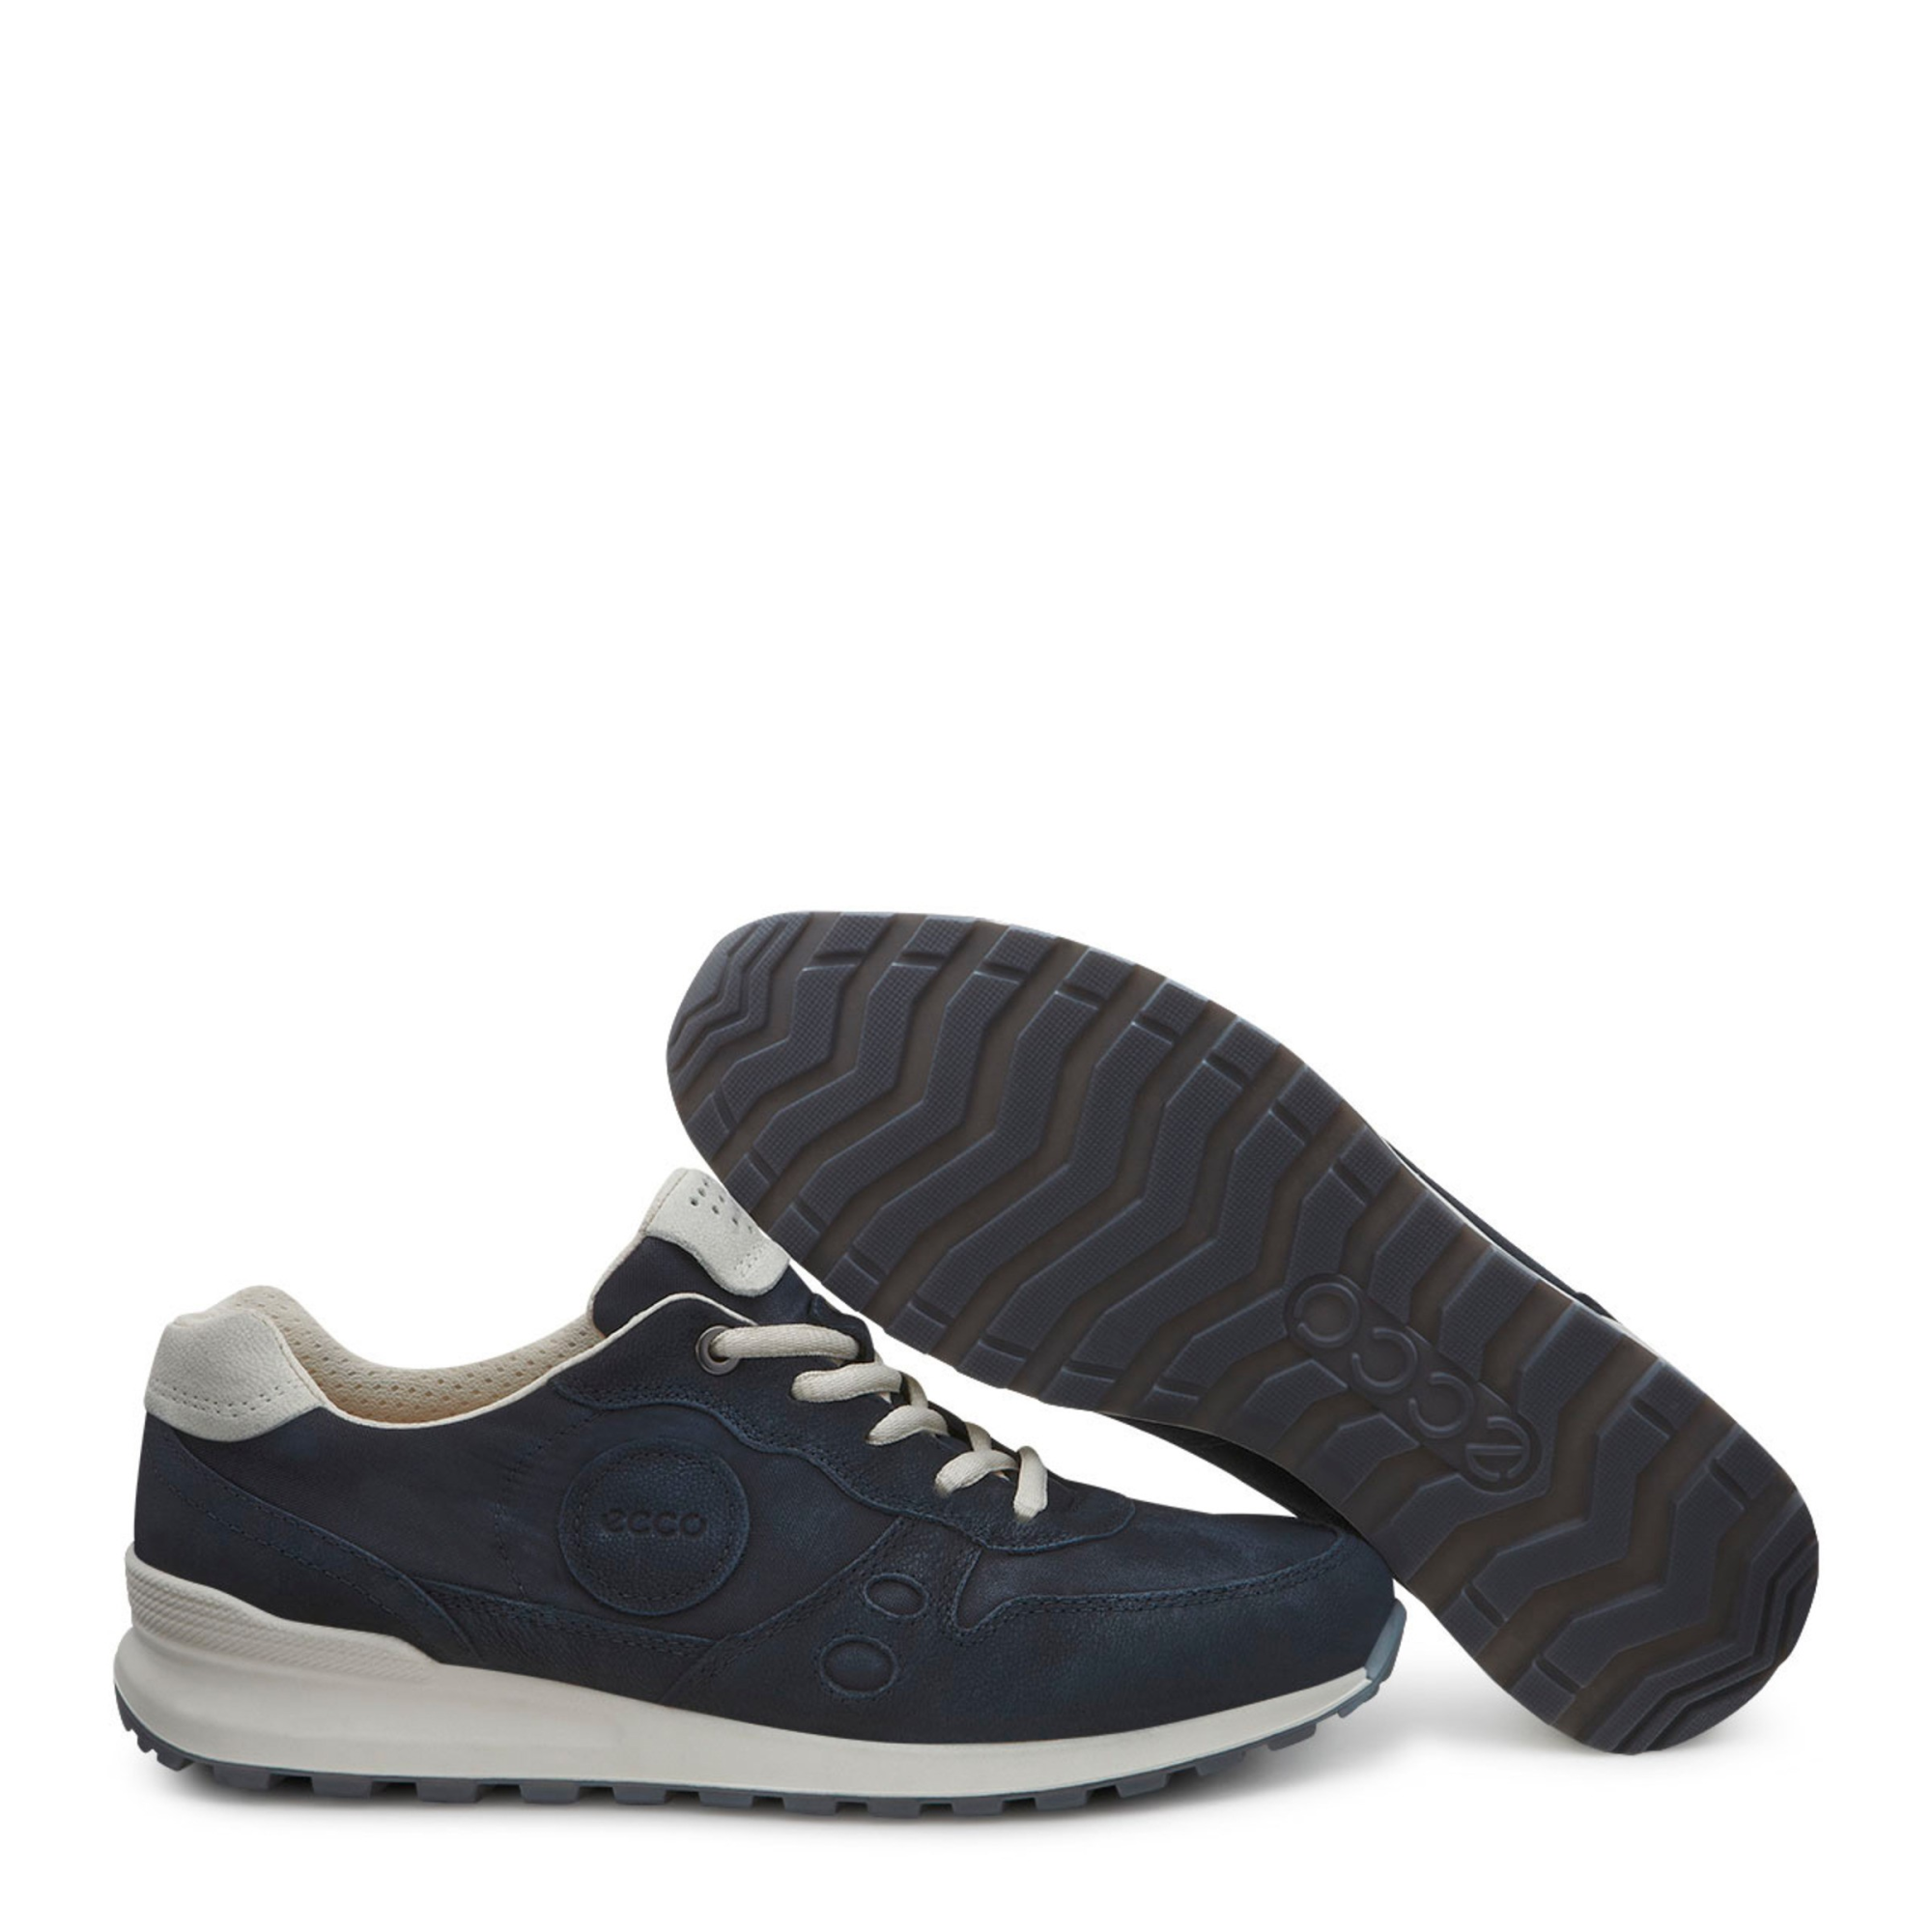 Ecco Womens Retro Sneaker 39 - Products - Veryk Mall - Veryk Mall, many quick response, safe your